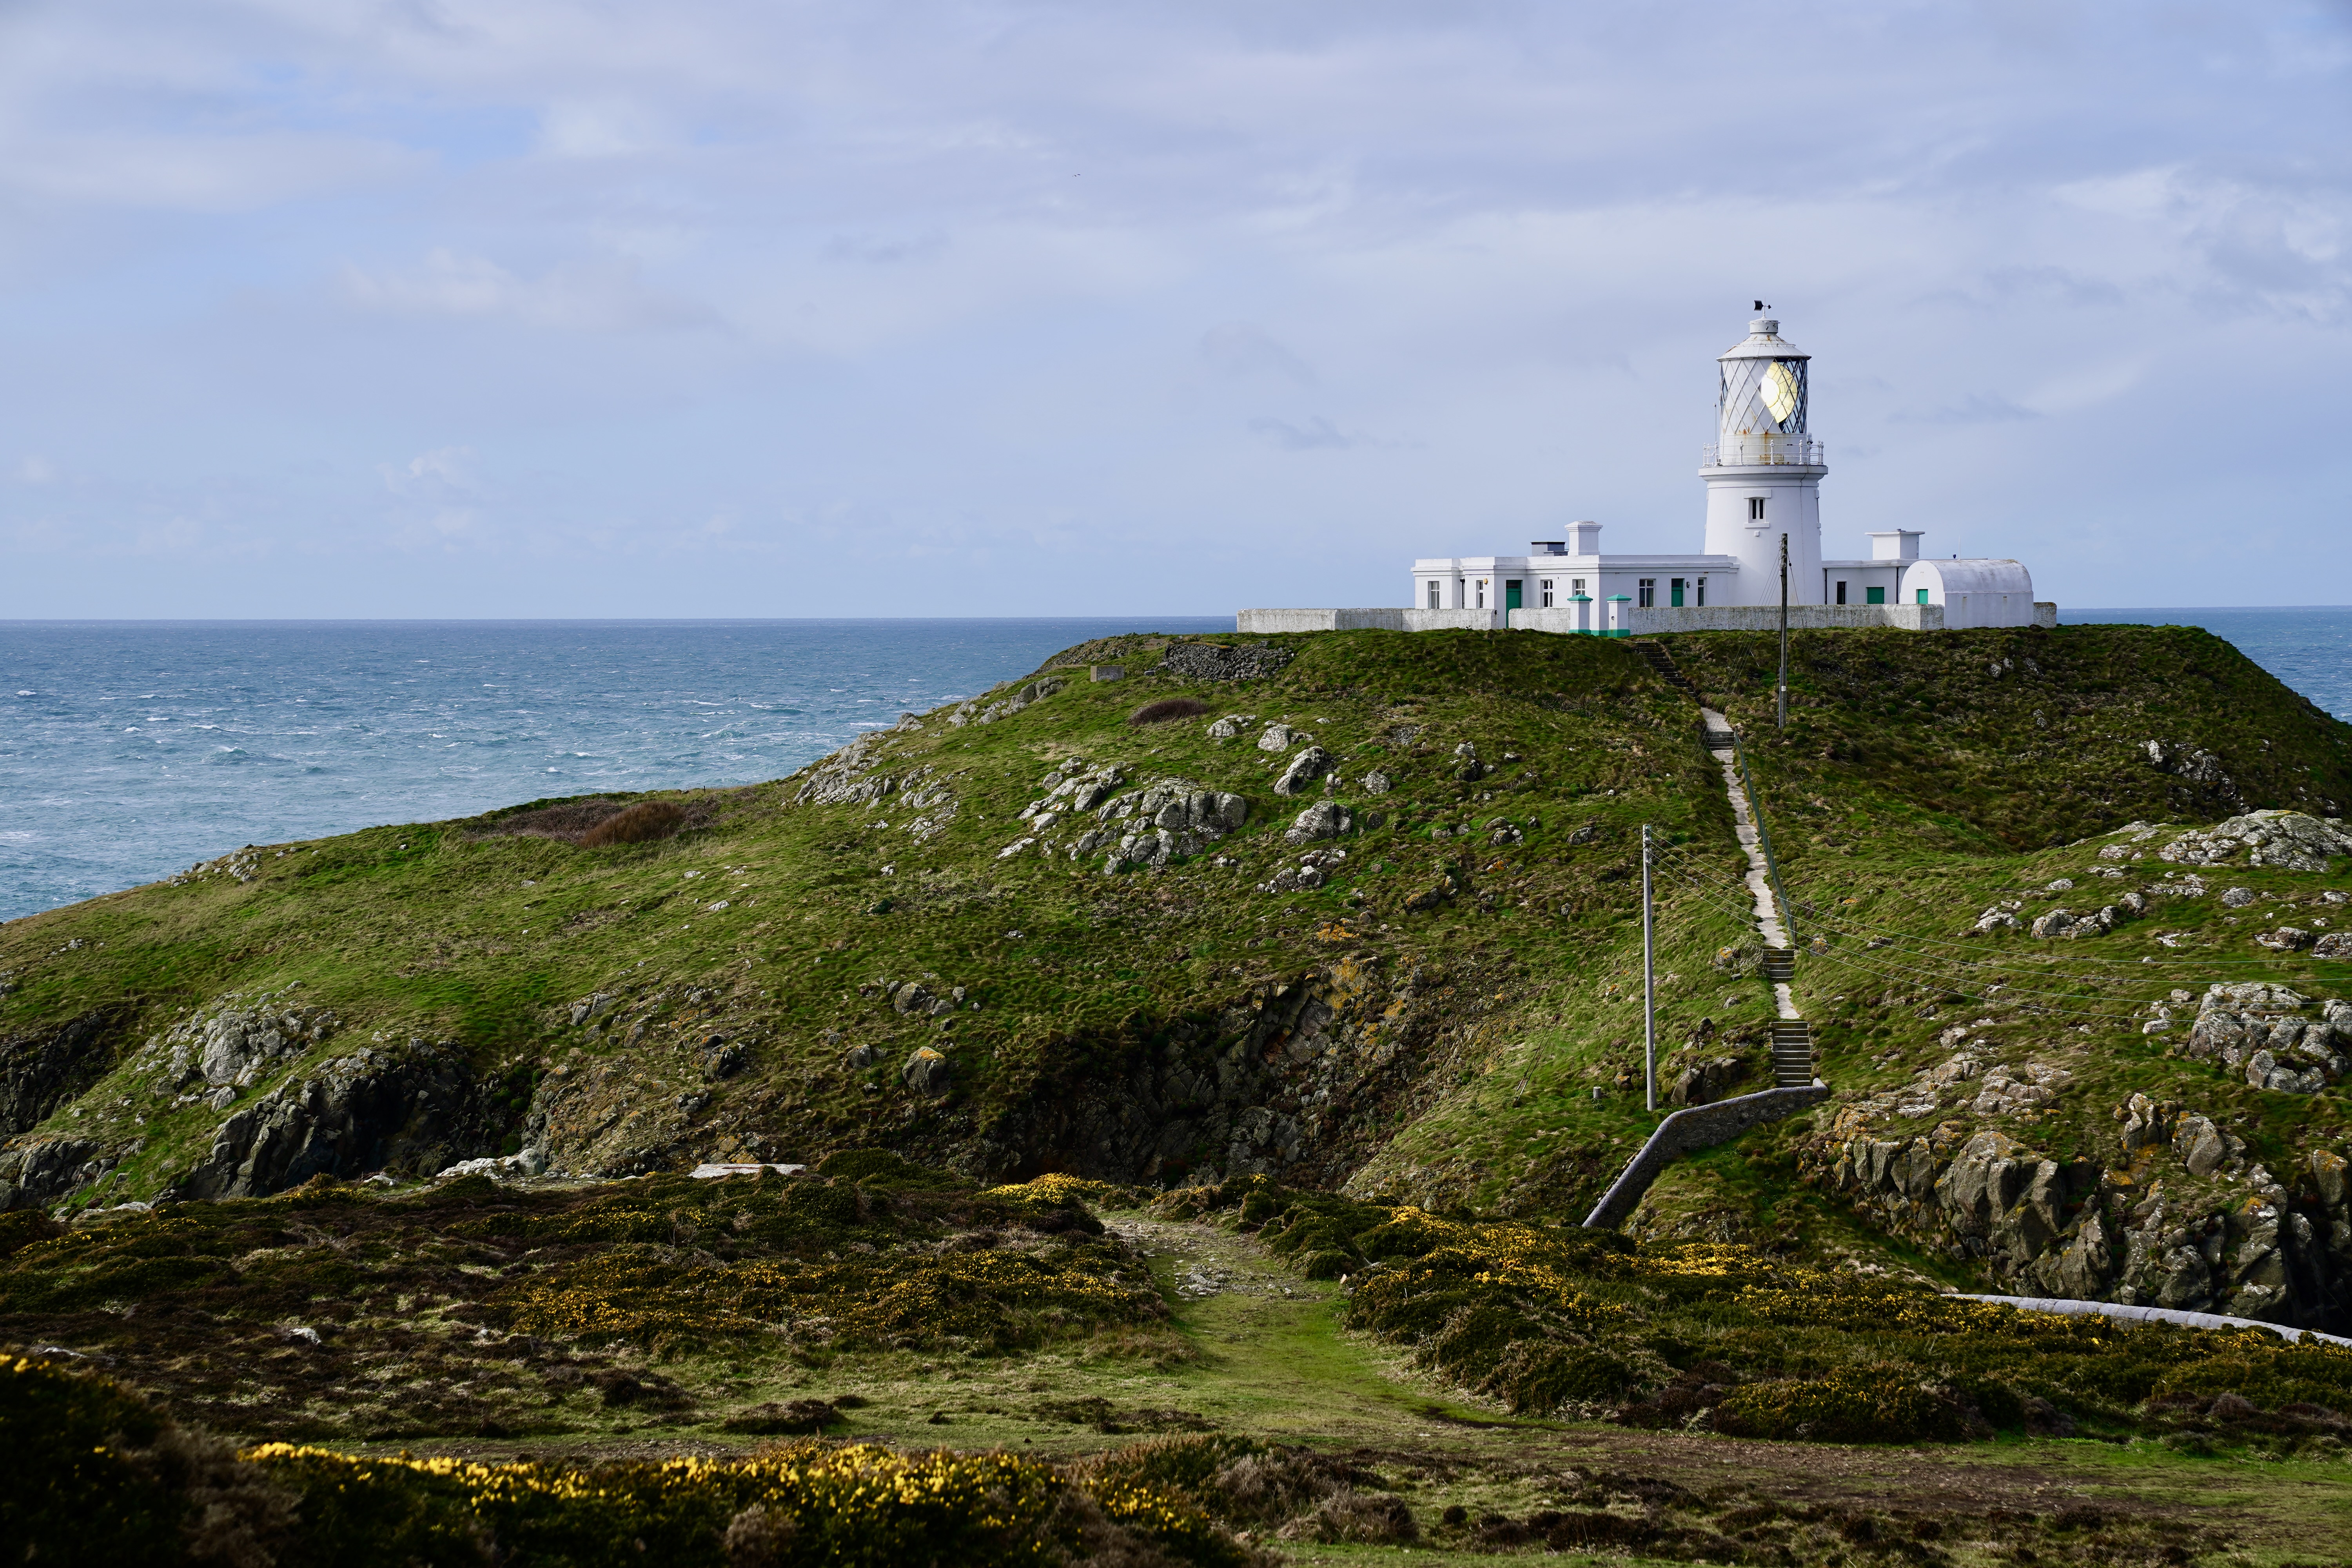 Strumble_Head_lighthouse_beams_out_its_warning